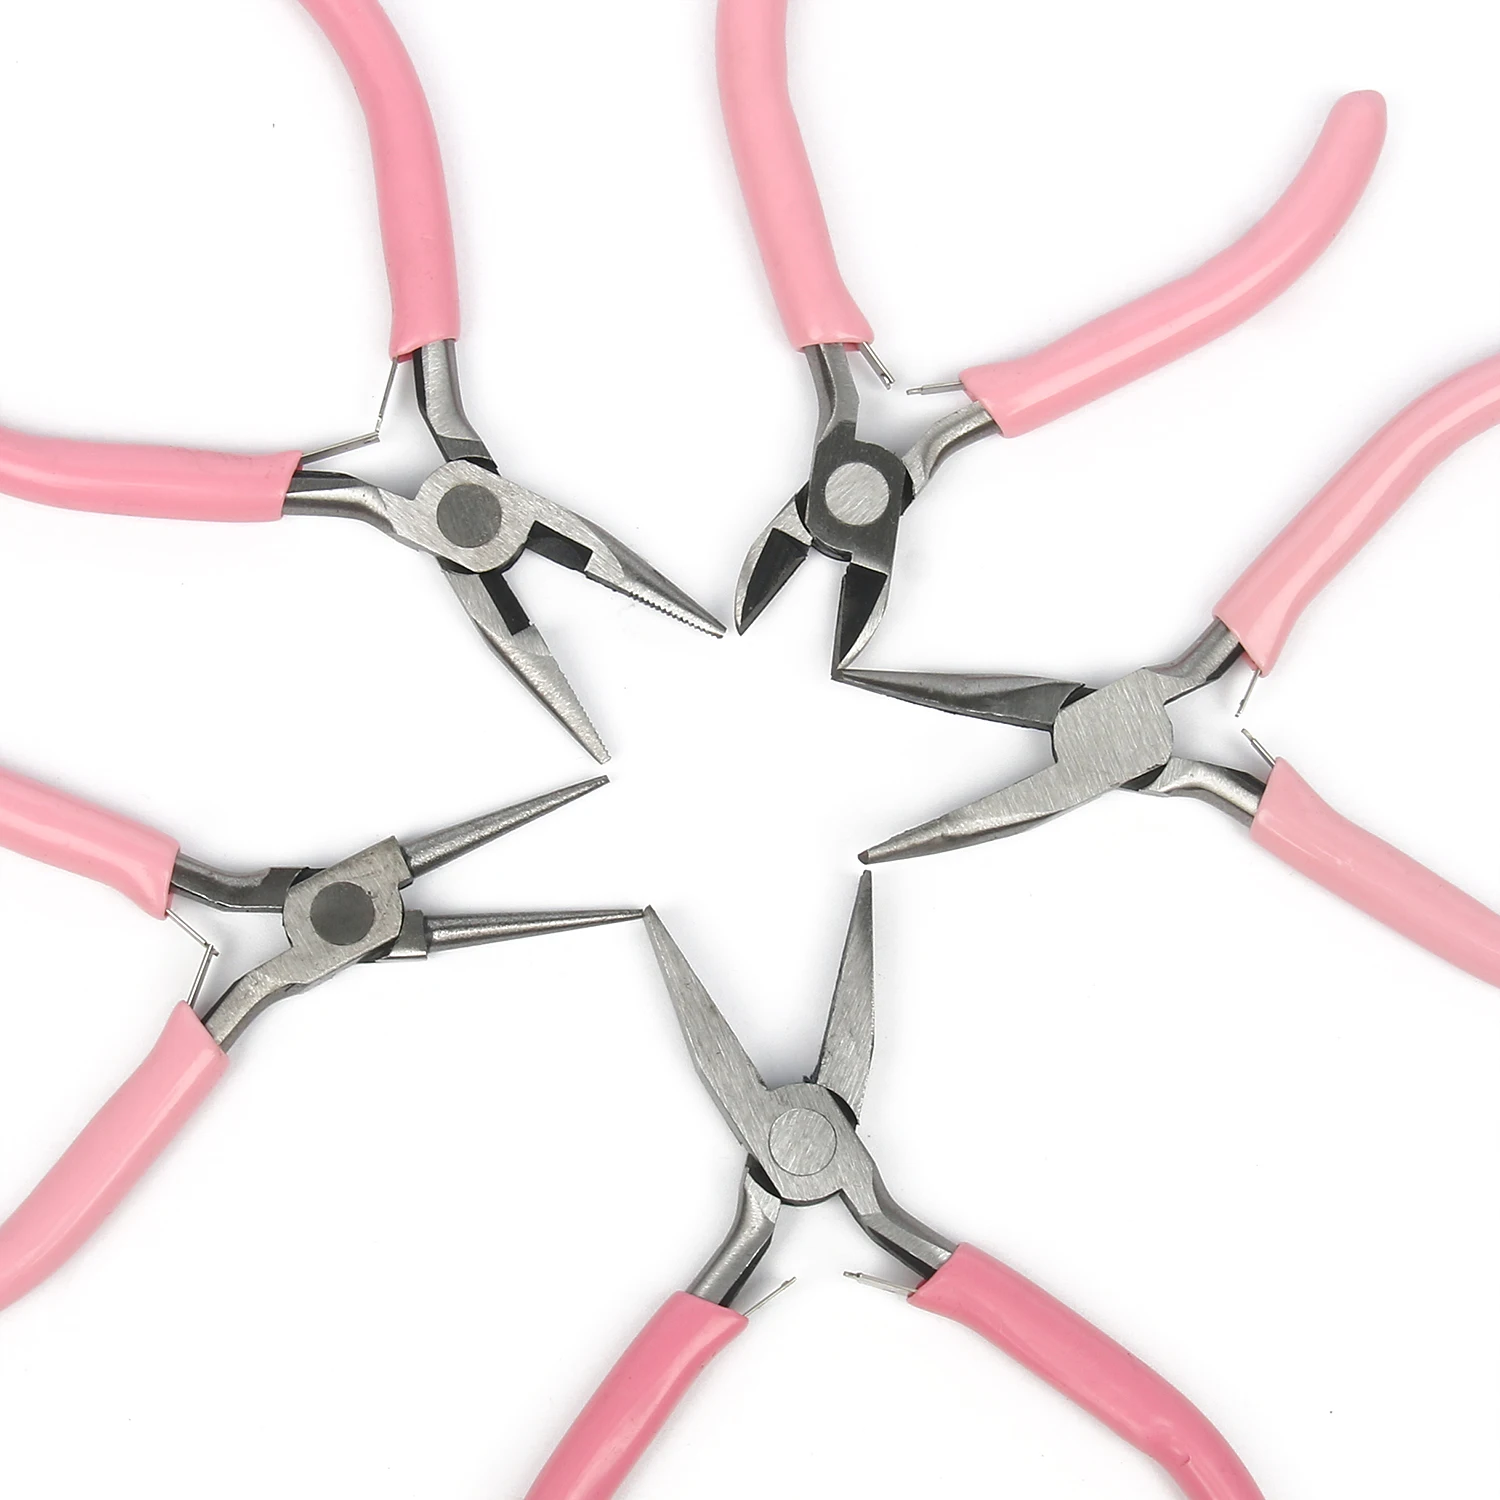 Pink Jewelry Pliers Tools Equipment Stainless Steel End Cutting